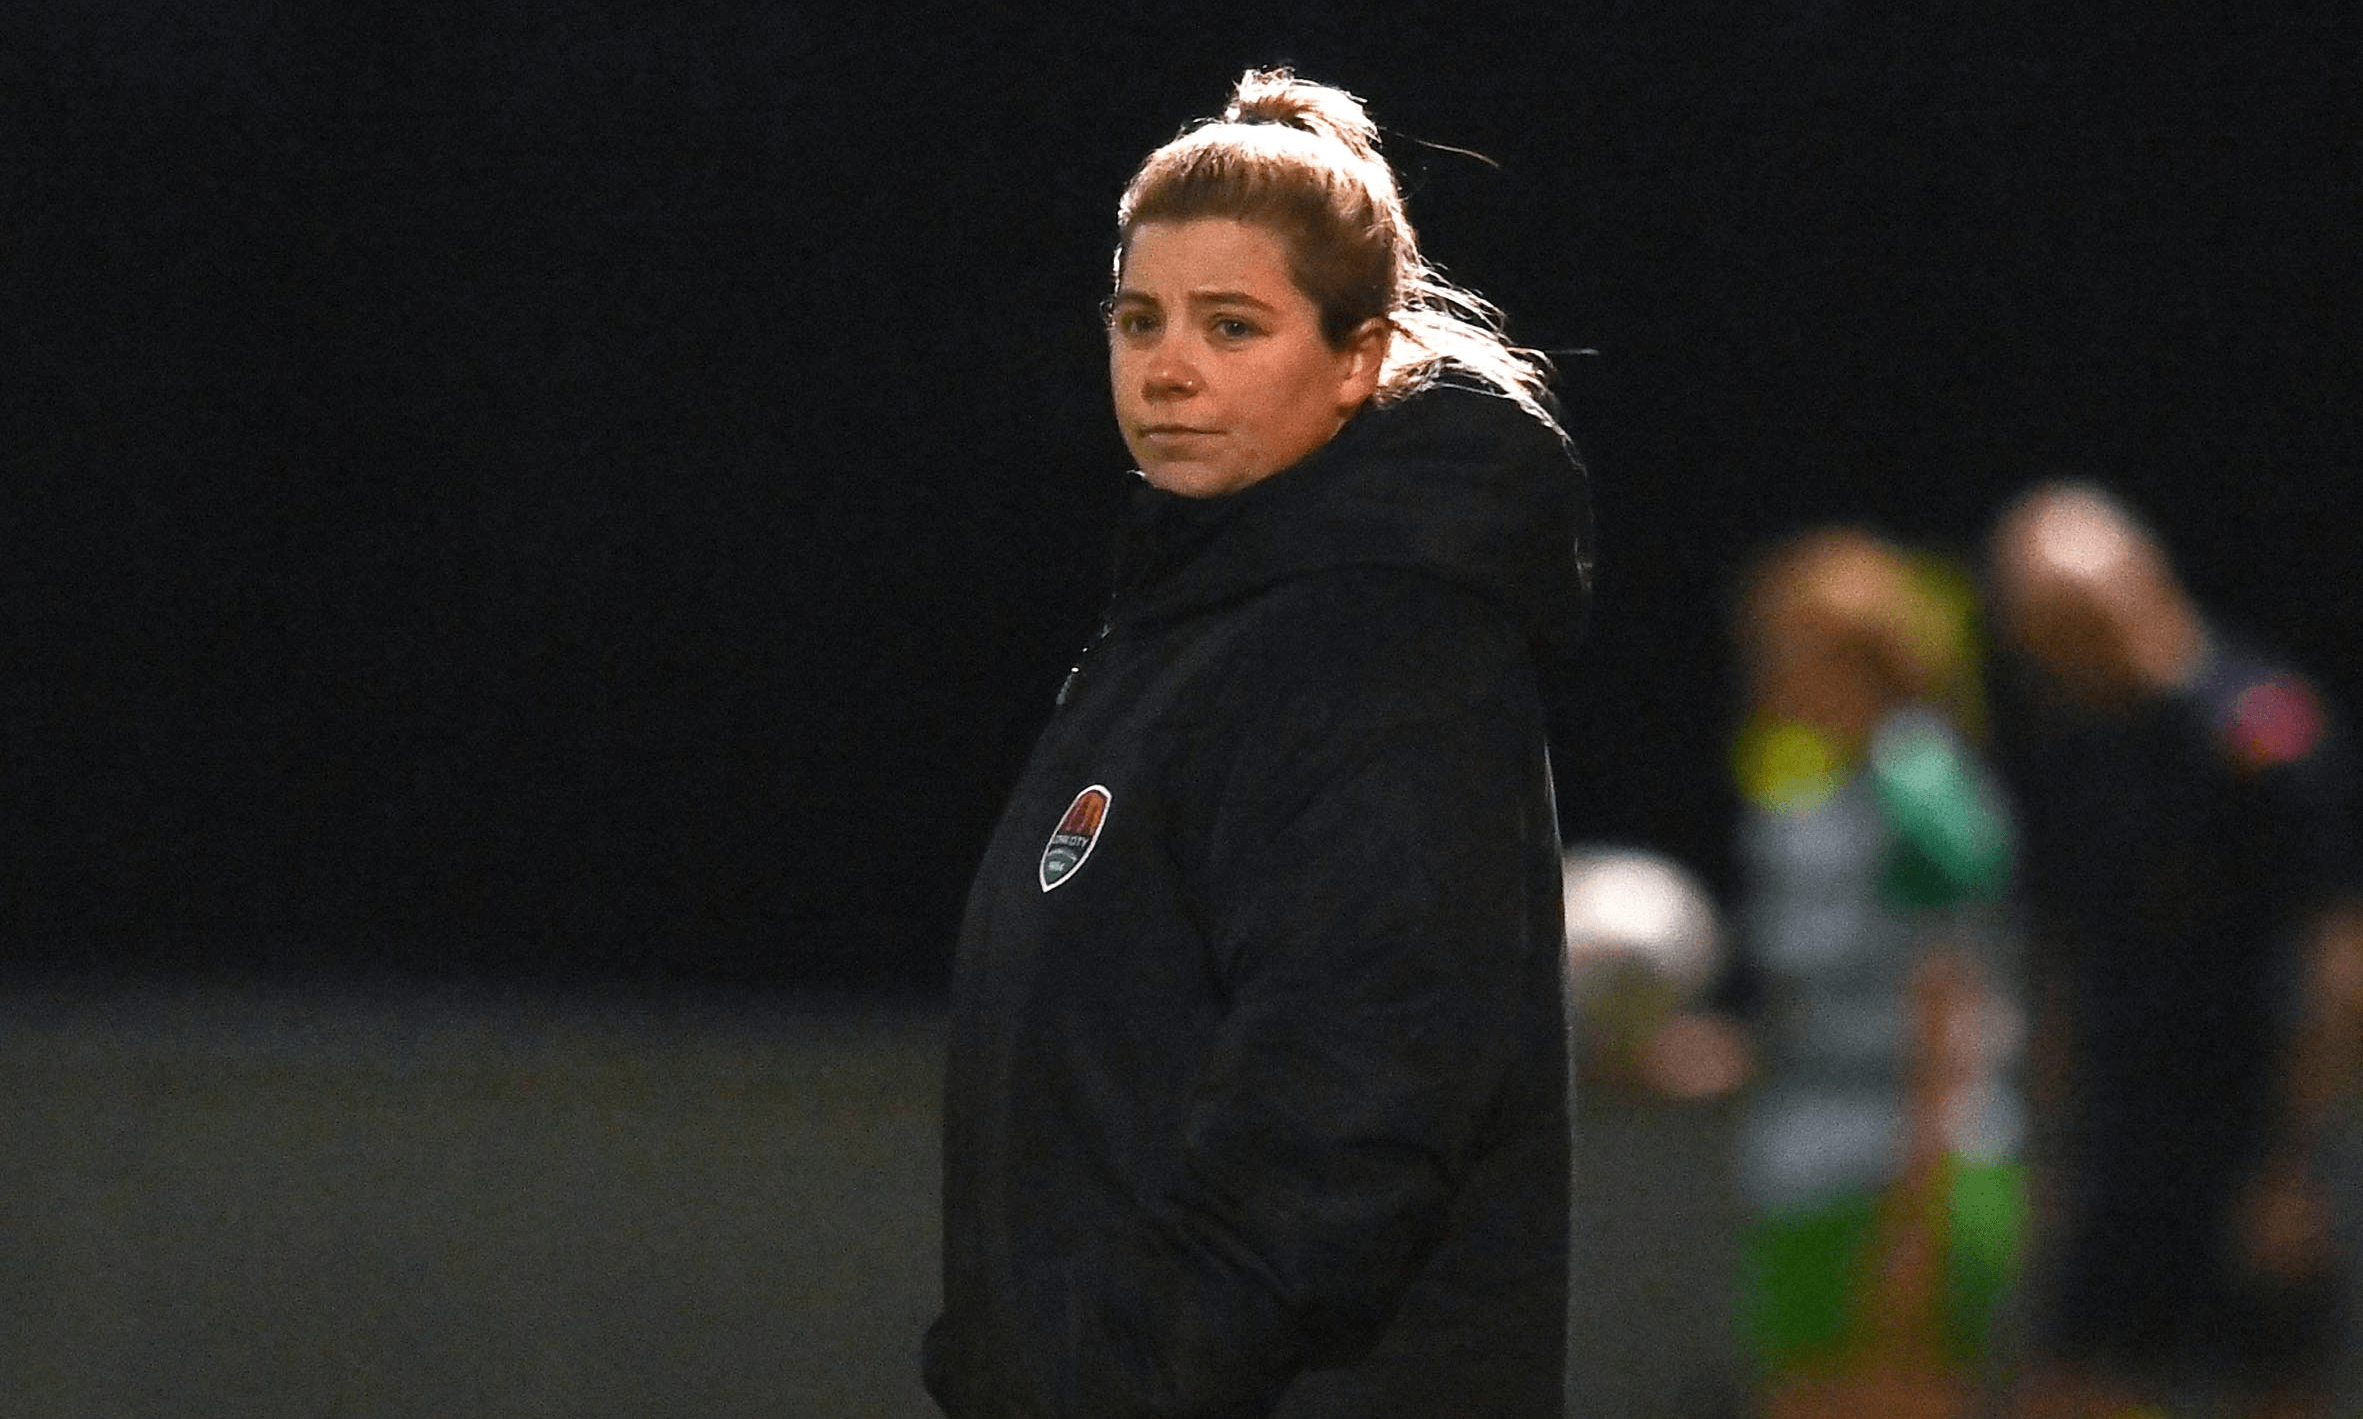 Sarah Healy steps down from WU17 role